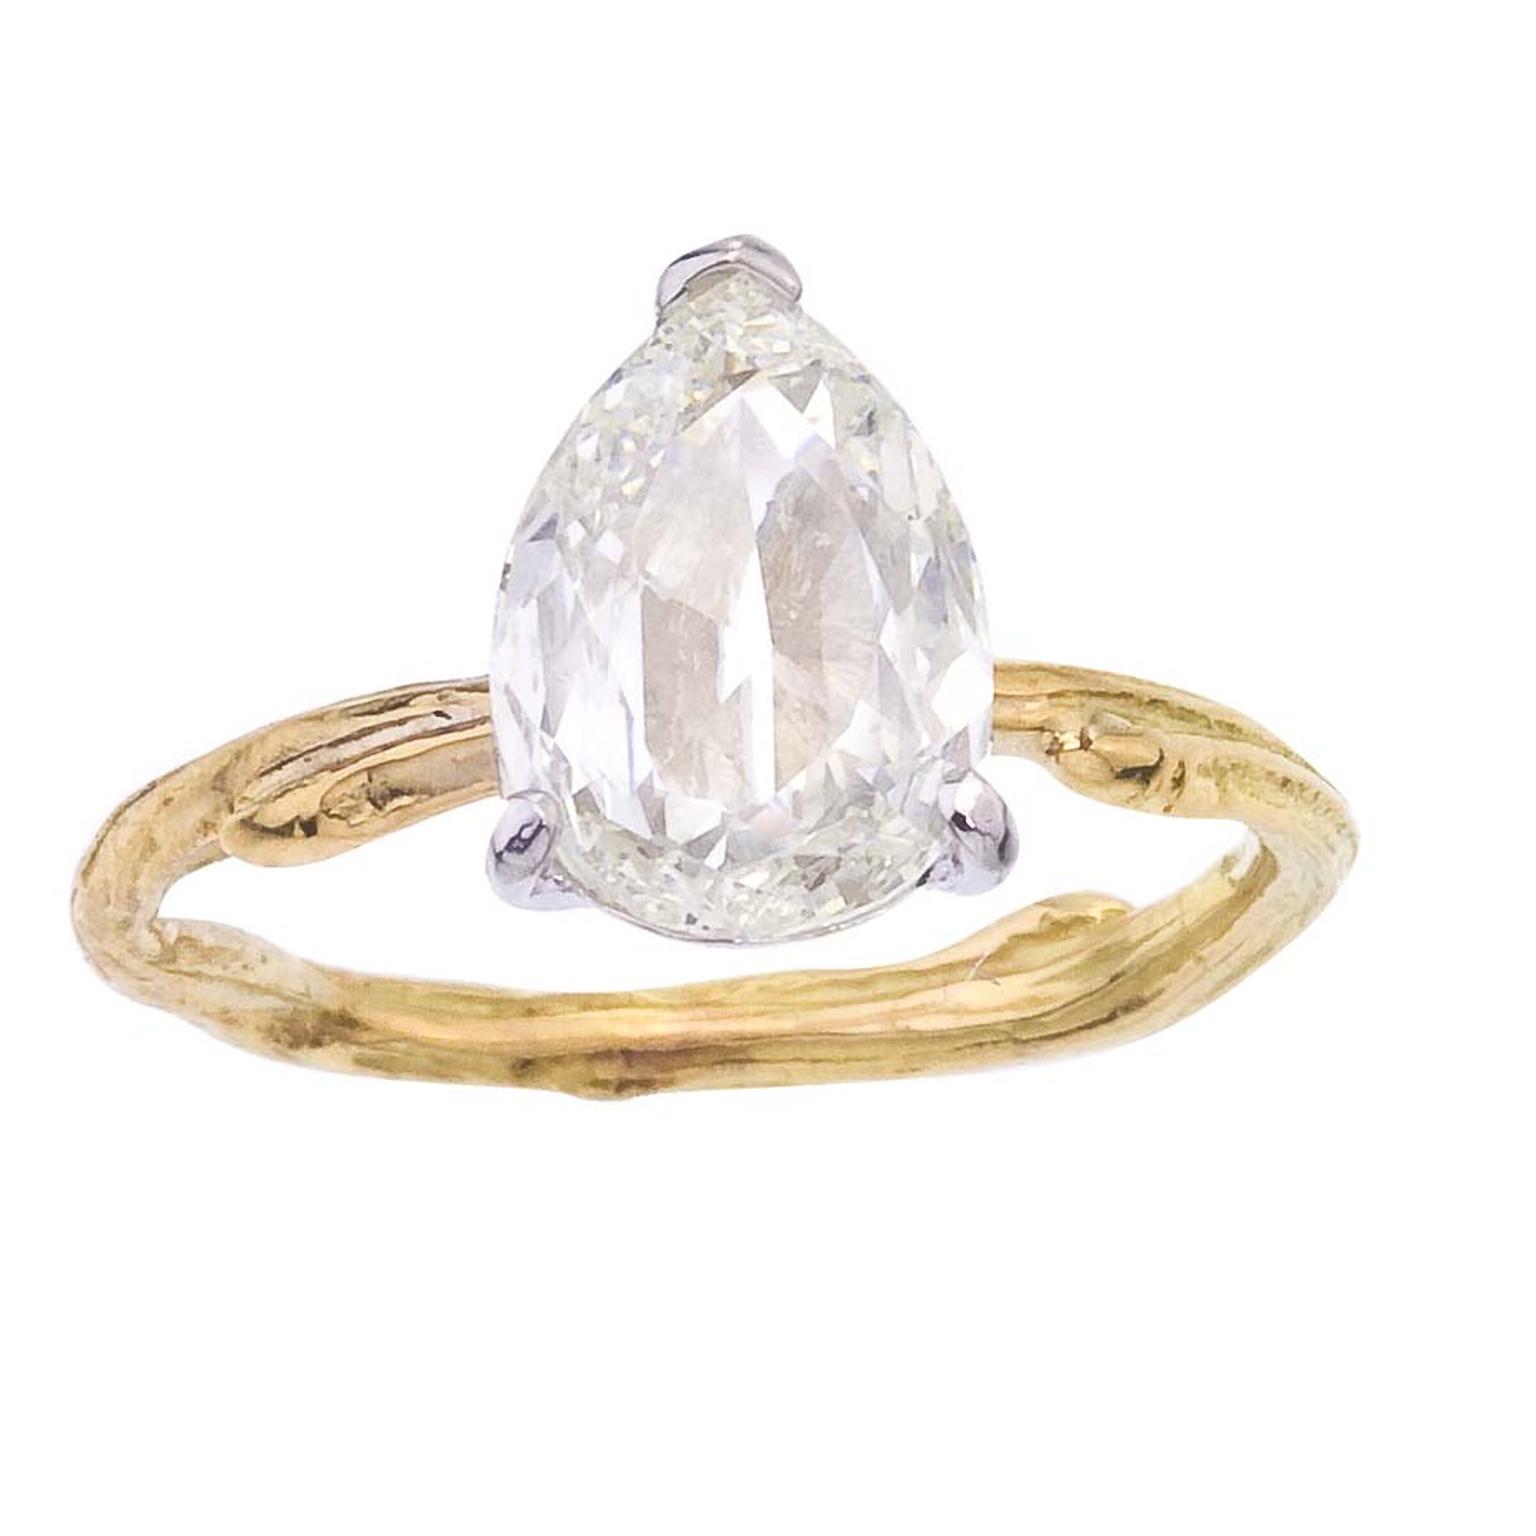 Barbara Michelle Jacobs pear-shaped diamond engagement ring, available with either a recycled yellow, white or rose gold twig band.